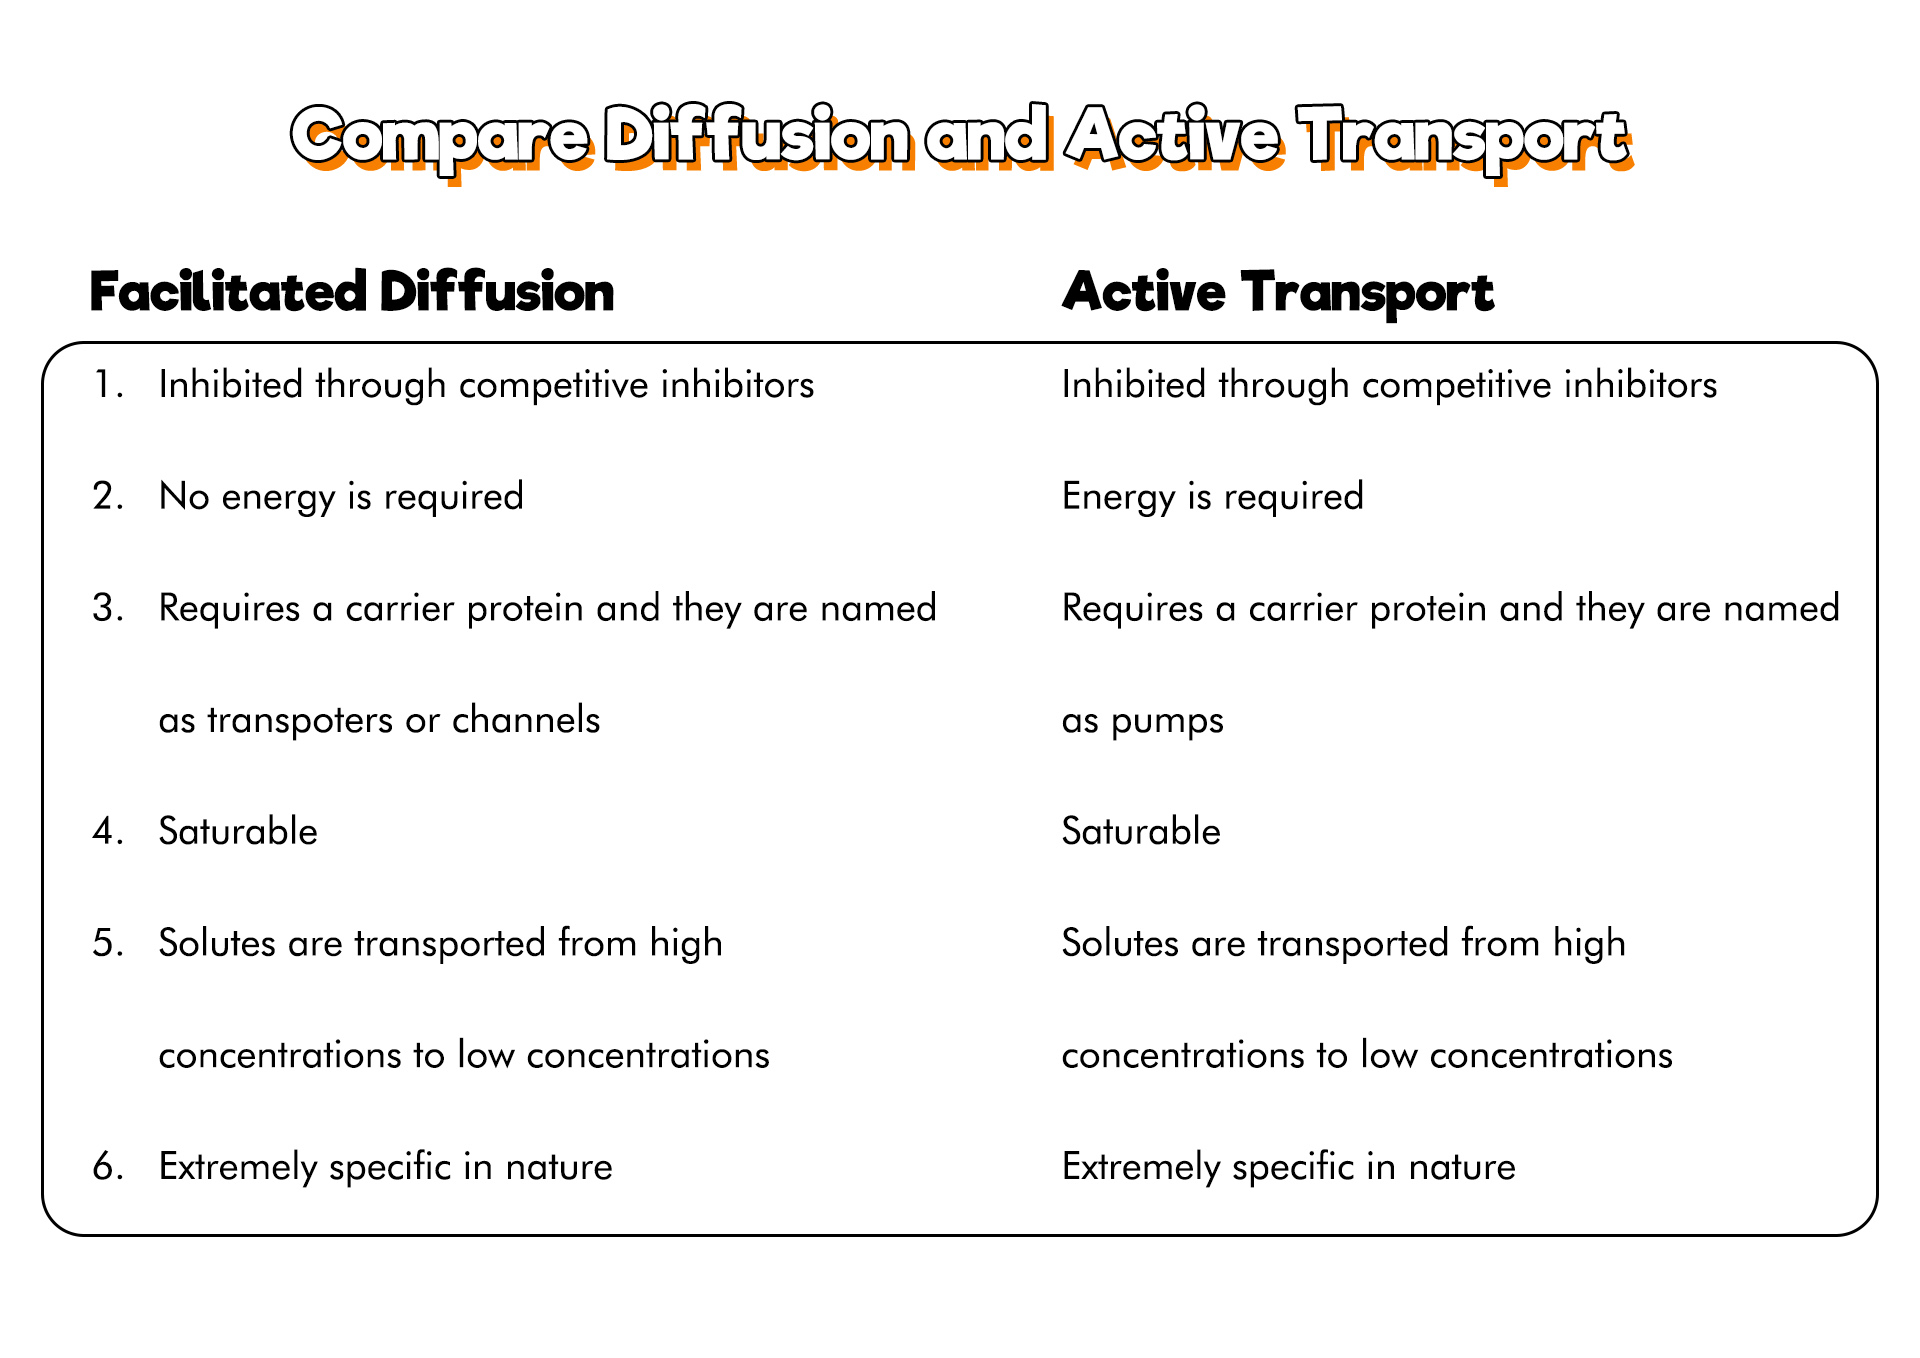 Compare Diffusion and Active Transport Image